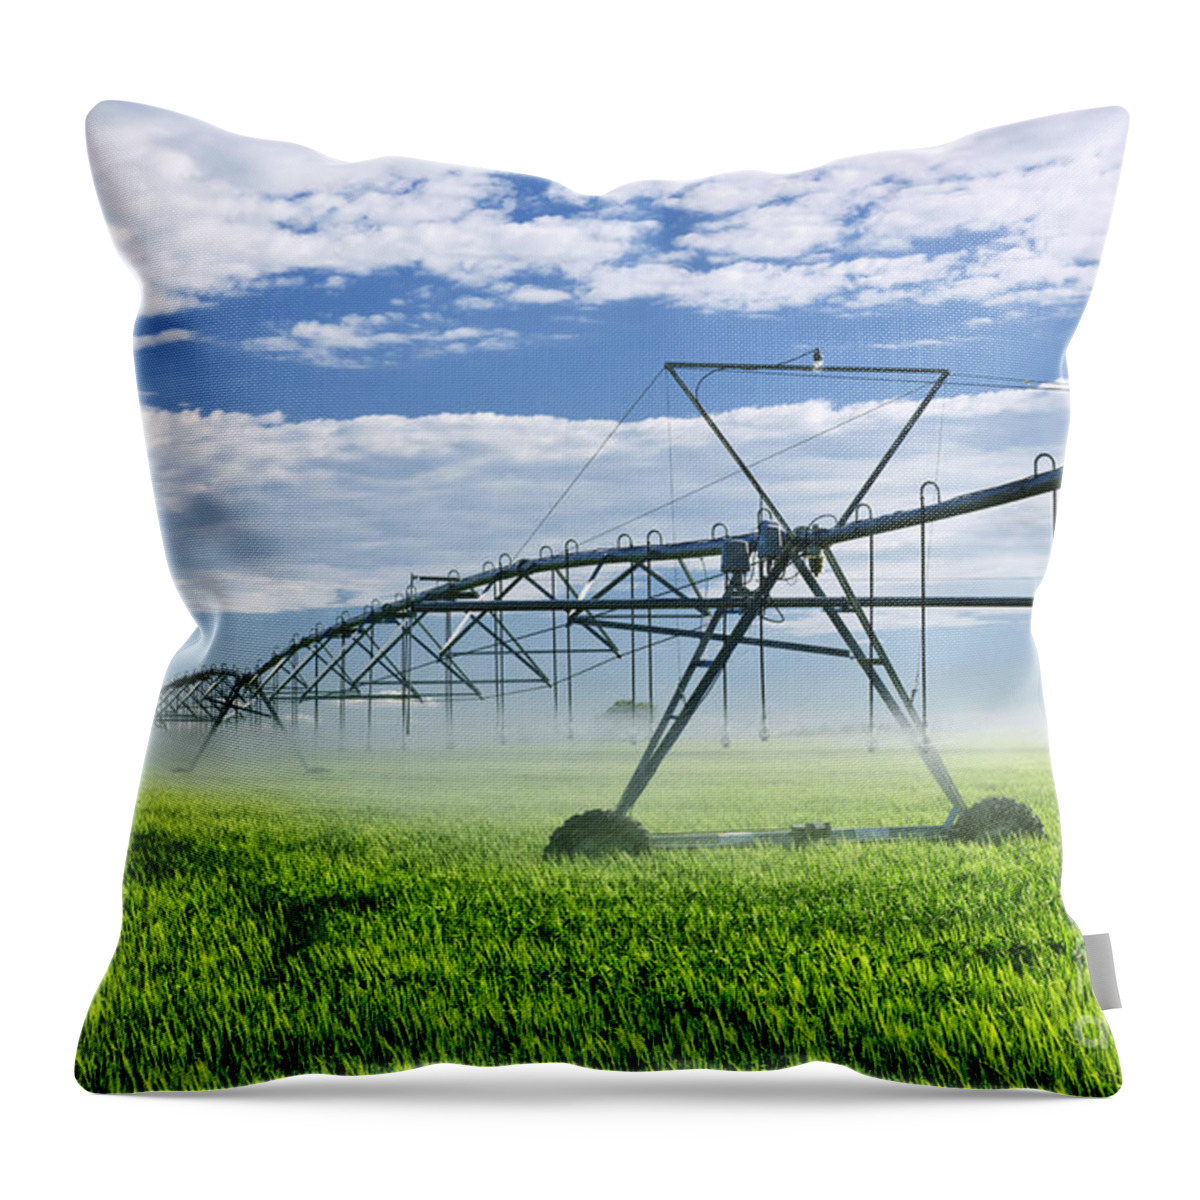 Irrigation Throw Pillow featuring the photograph Irrigation equipment on farm field 1 by Elena Elisseeva